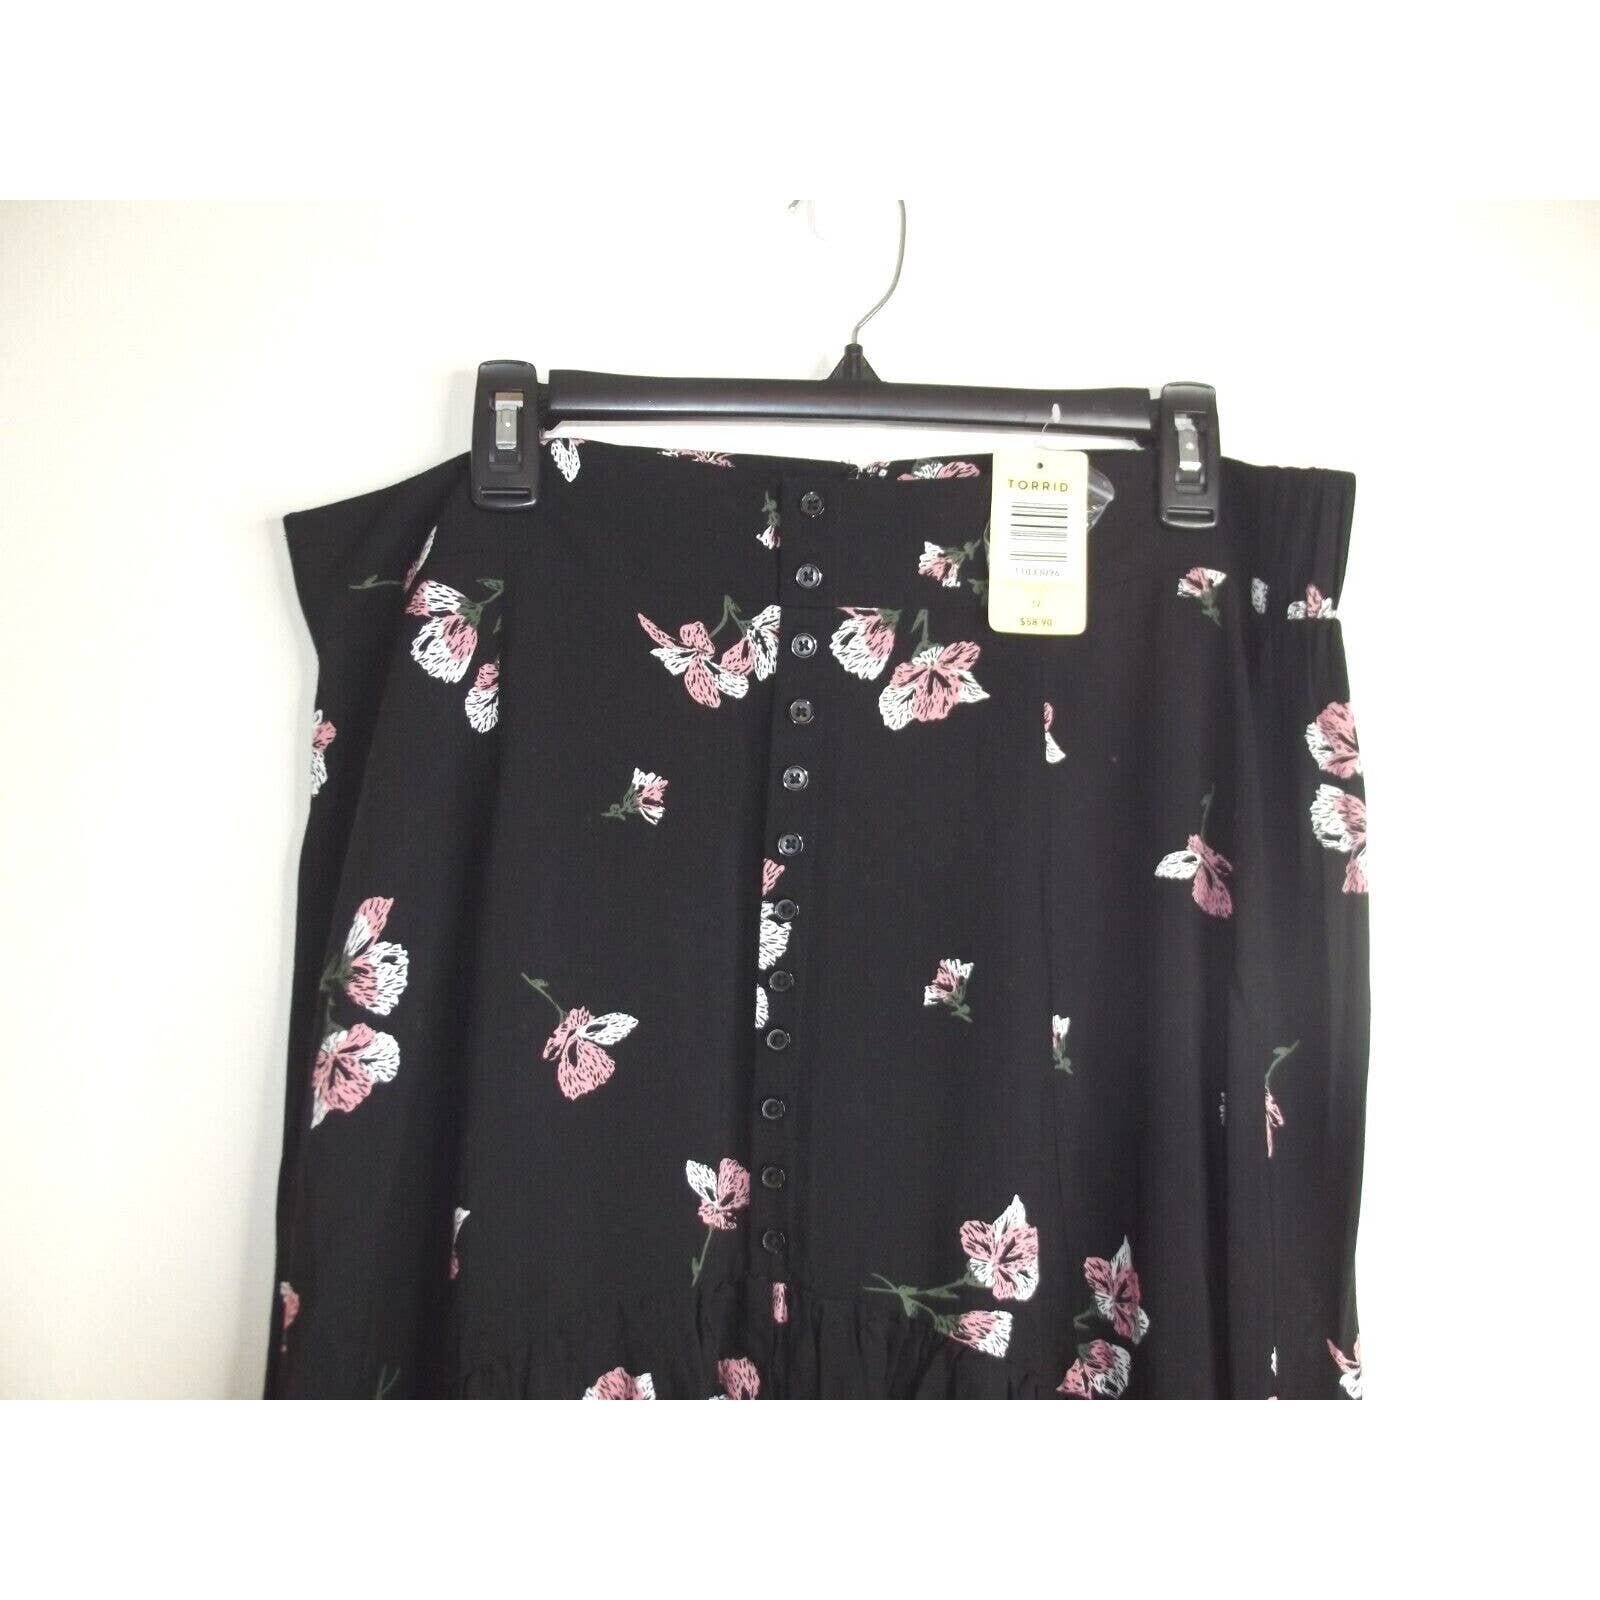 Discounted TORRID Womens Button Front Maxi SKIRT - Size 12 - Black Floral Challis NWT H12knvETQ Wholesale